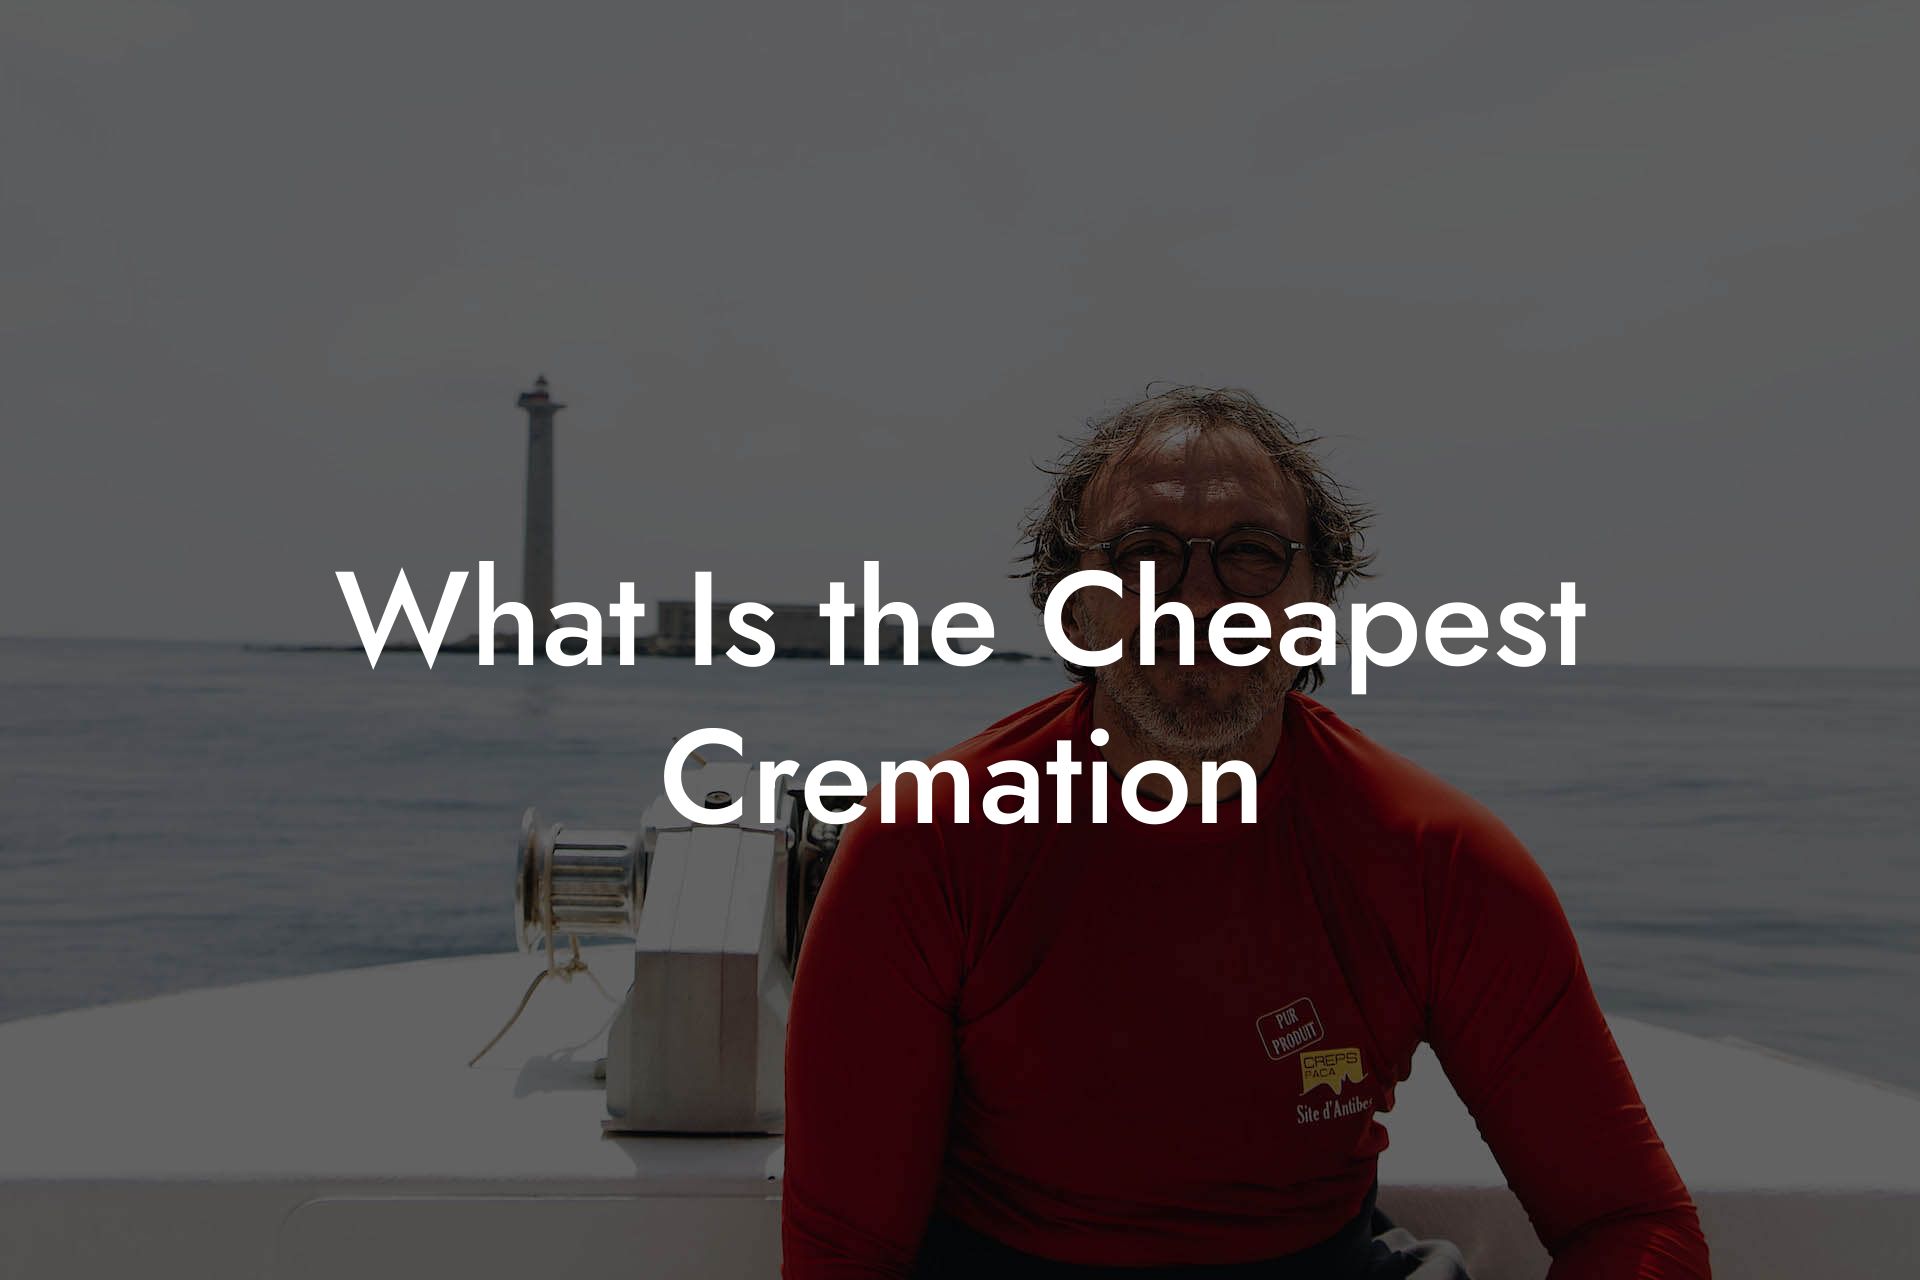 What Is the Cheapest Cremation